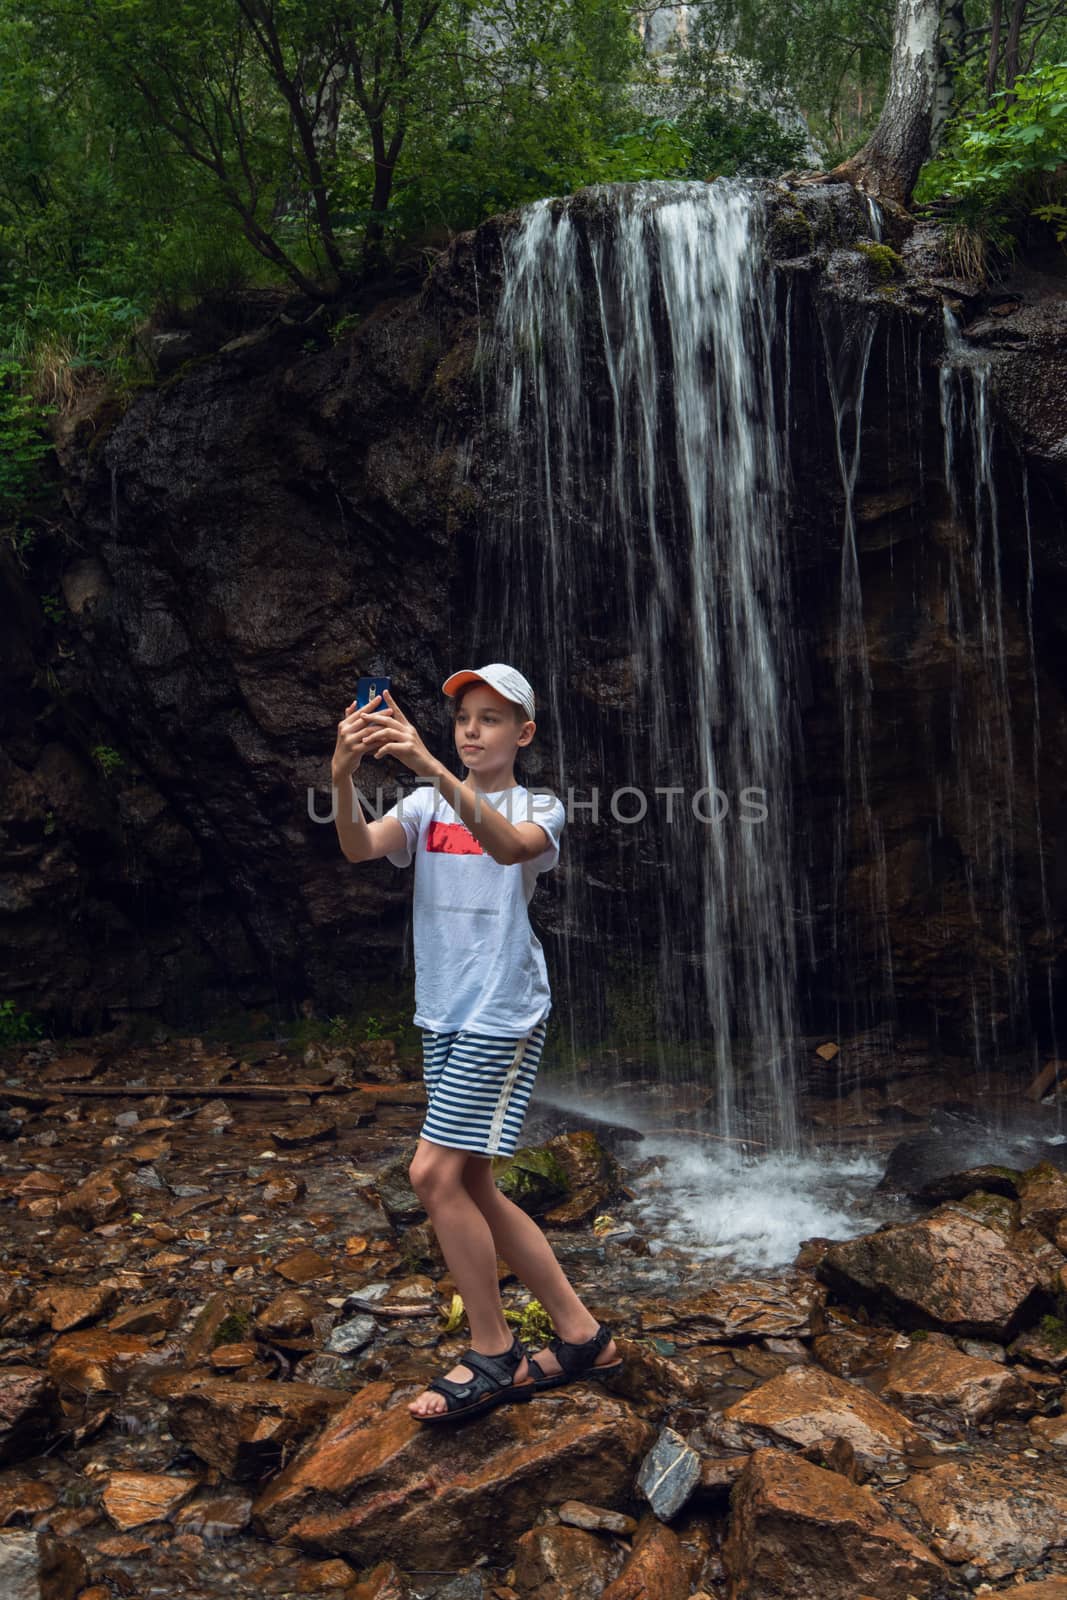 Stunning view of a boy tourist taking selfie photos with a smartphone at the waterfalls background in the Altai mountains.